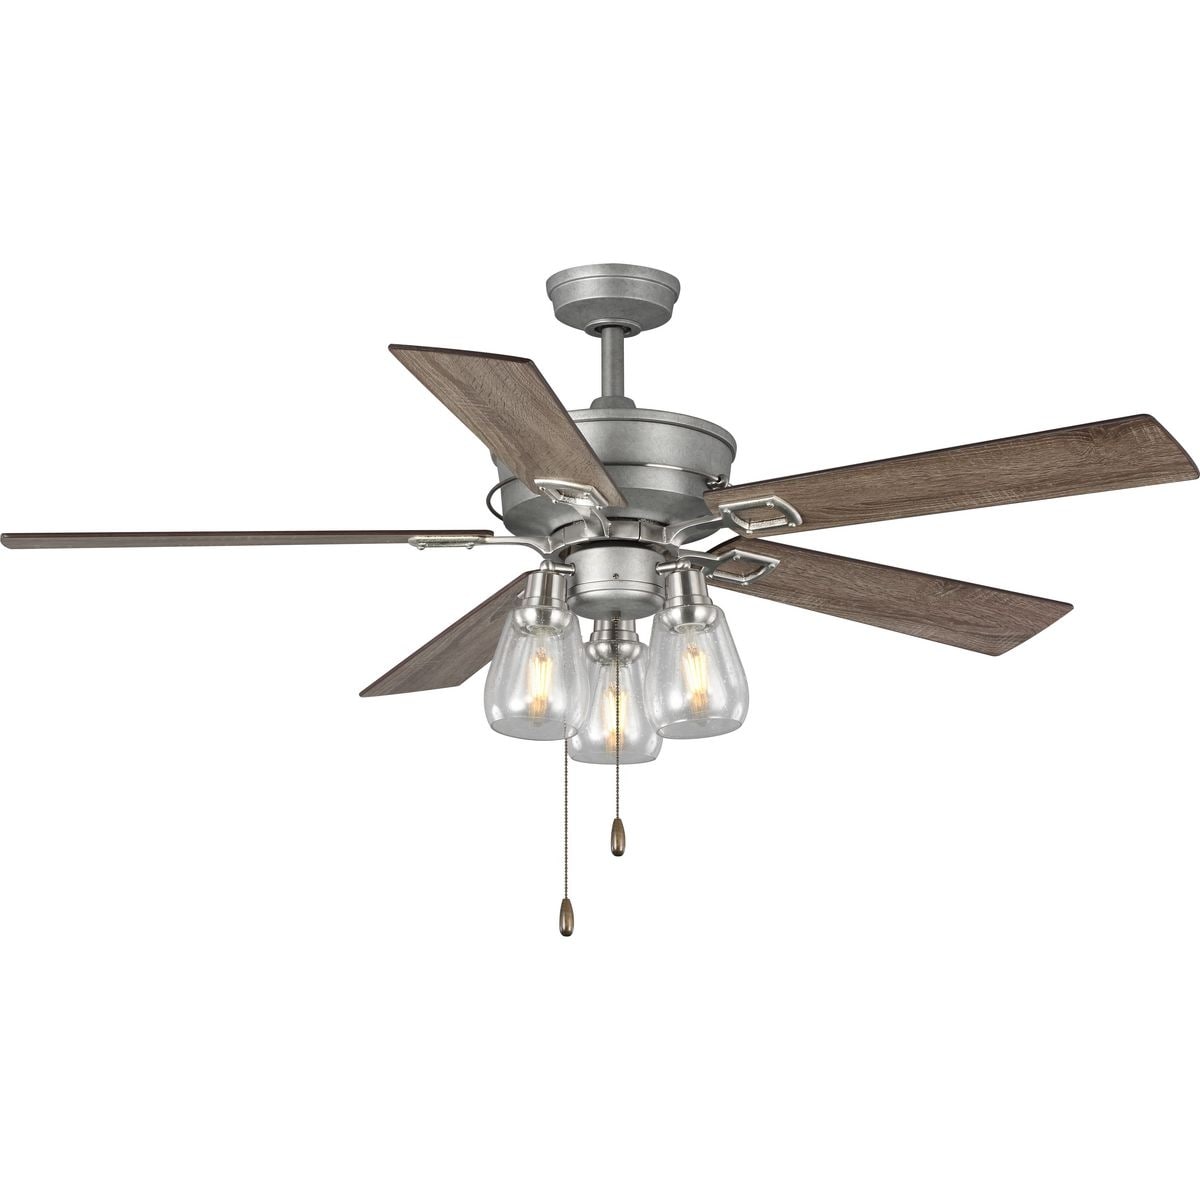 Teasley Collection 56 Five Blade Ceiling Fan With Glass Shades 12620